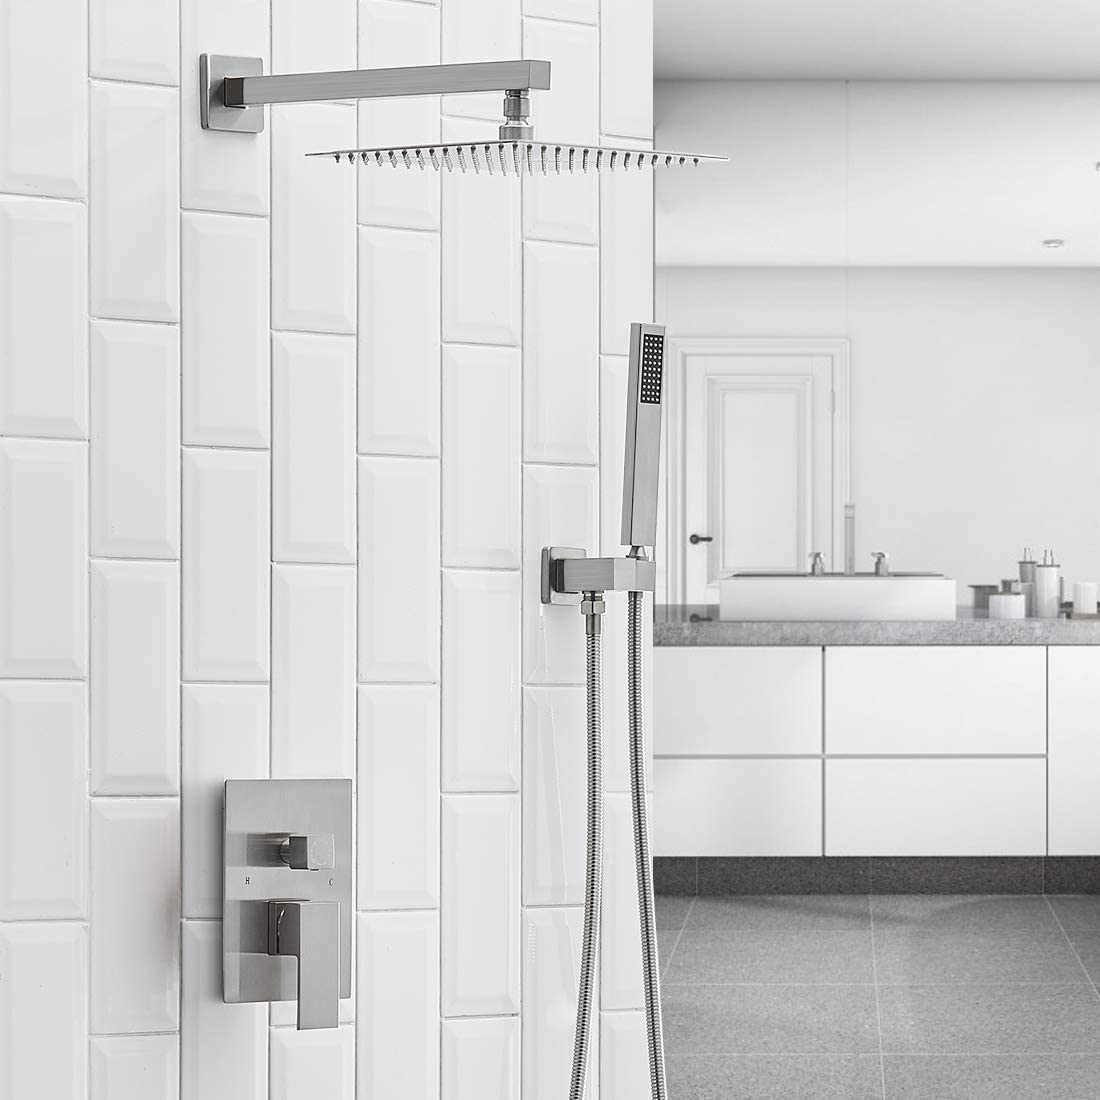 10 Inch Square Bathroom Shower Combo Set in Brushed Nickel-1 - buyfaucet.com